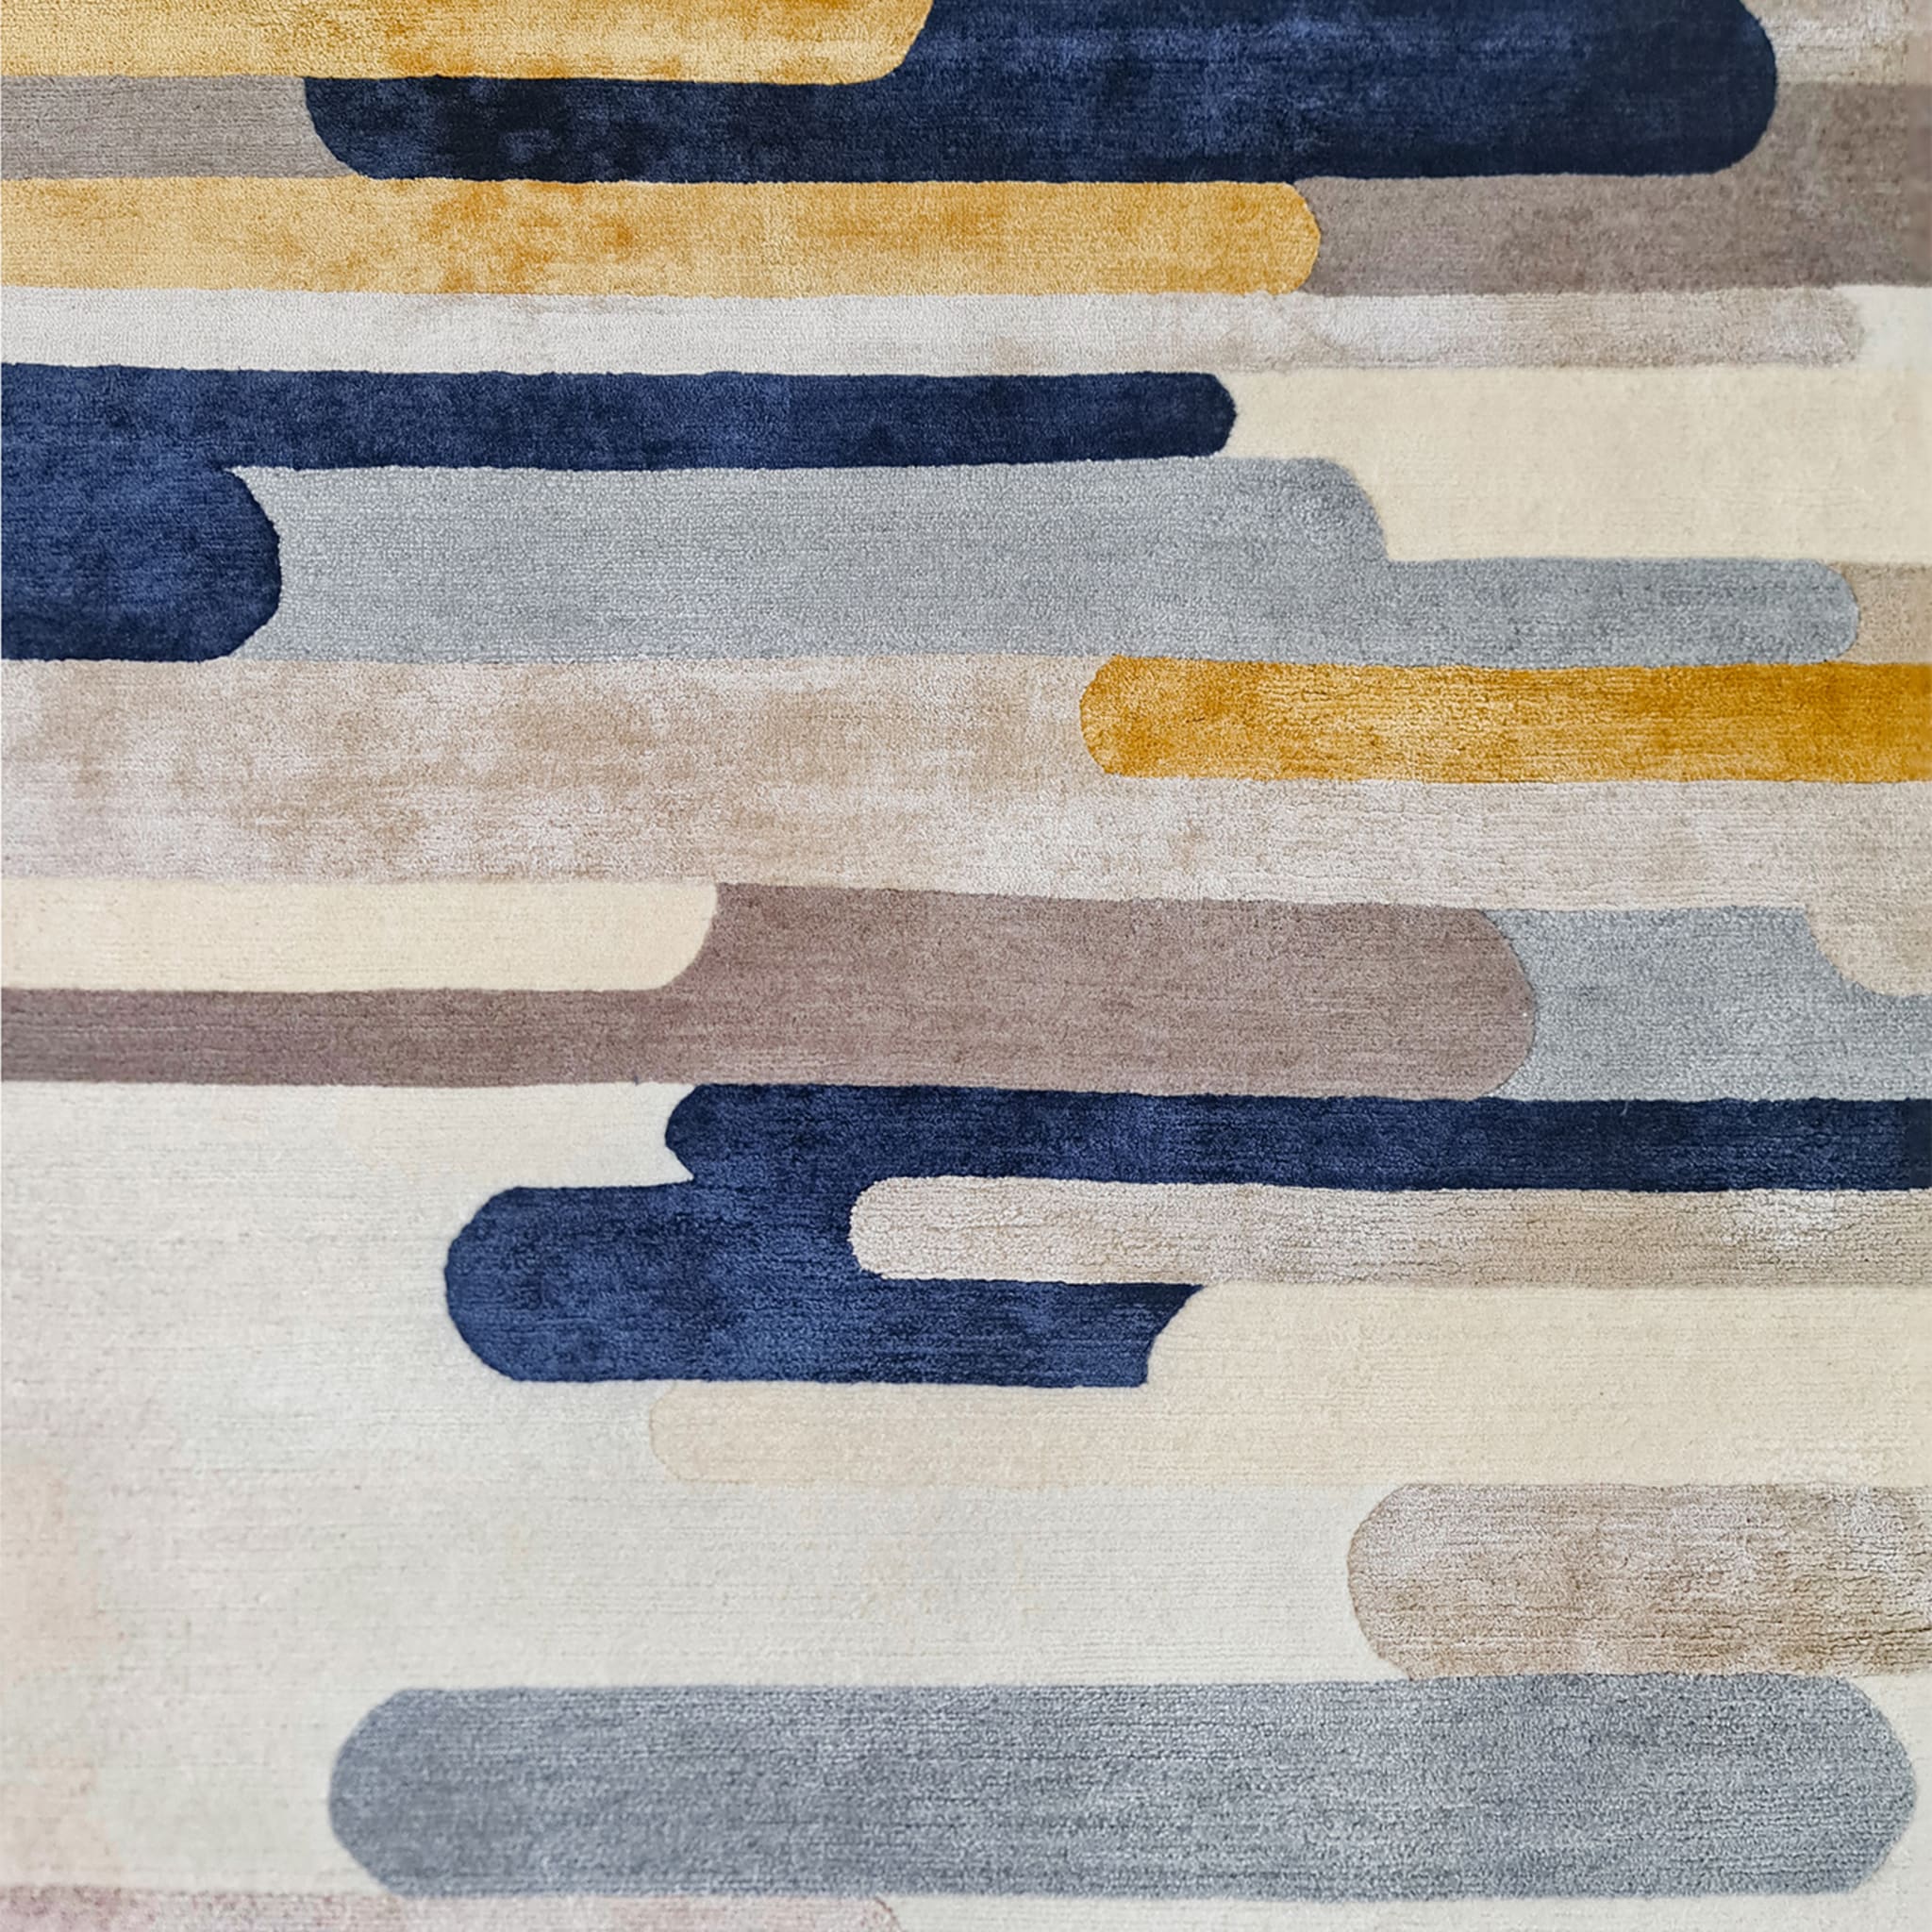 Ambiance Collection Rue Cler Rug - Alternative view 1